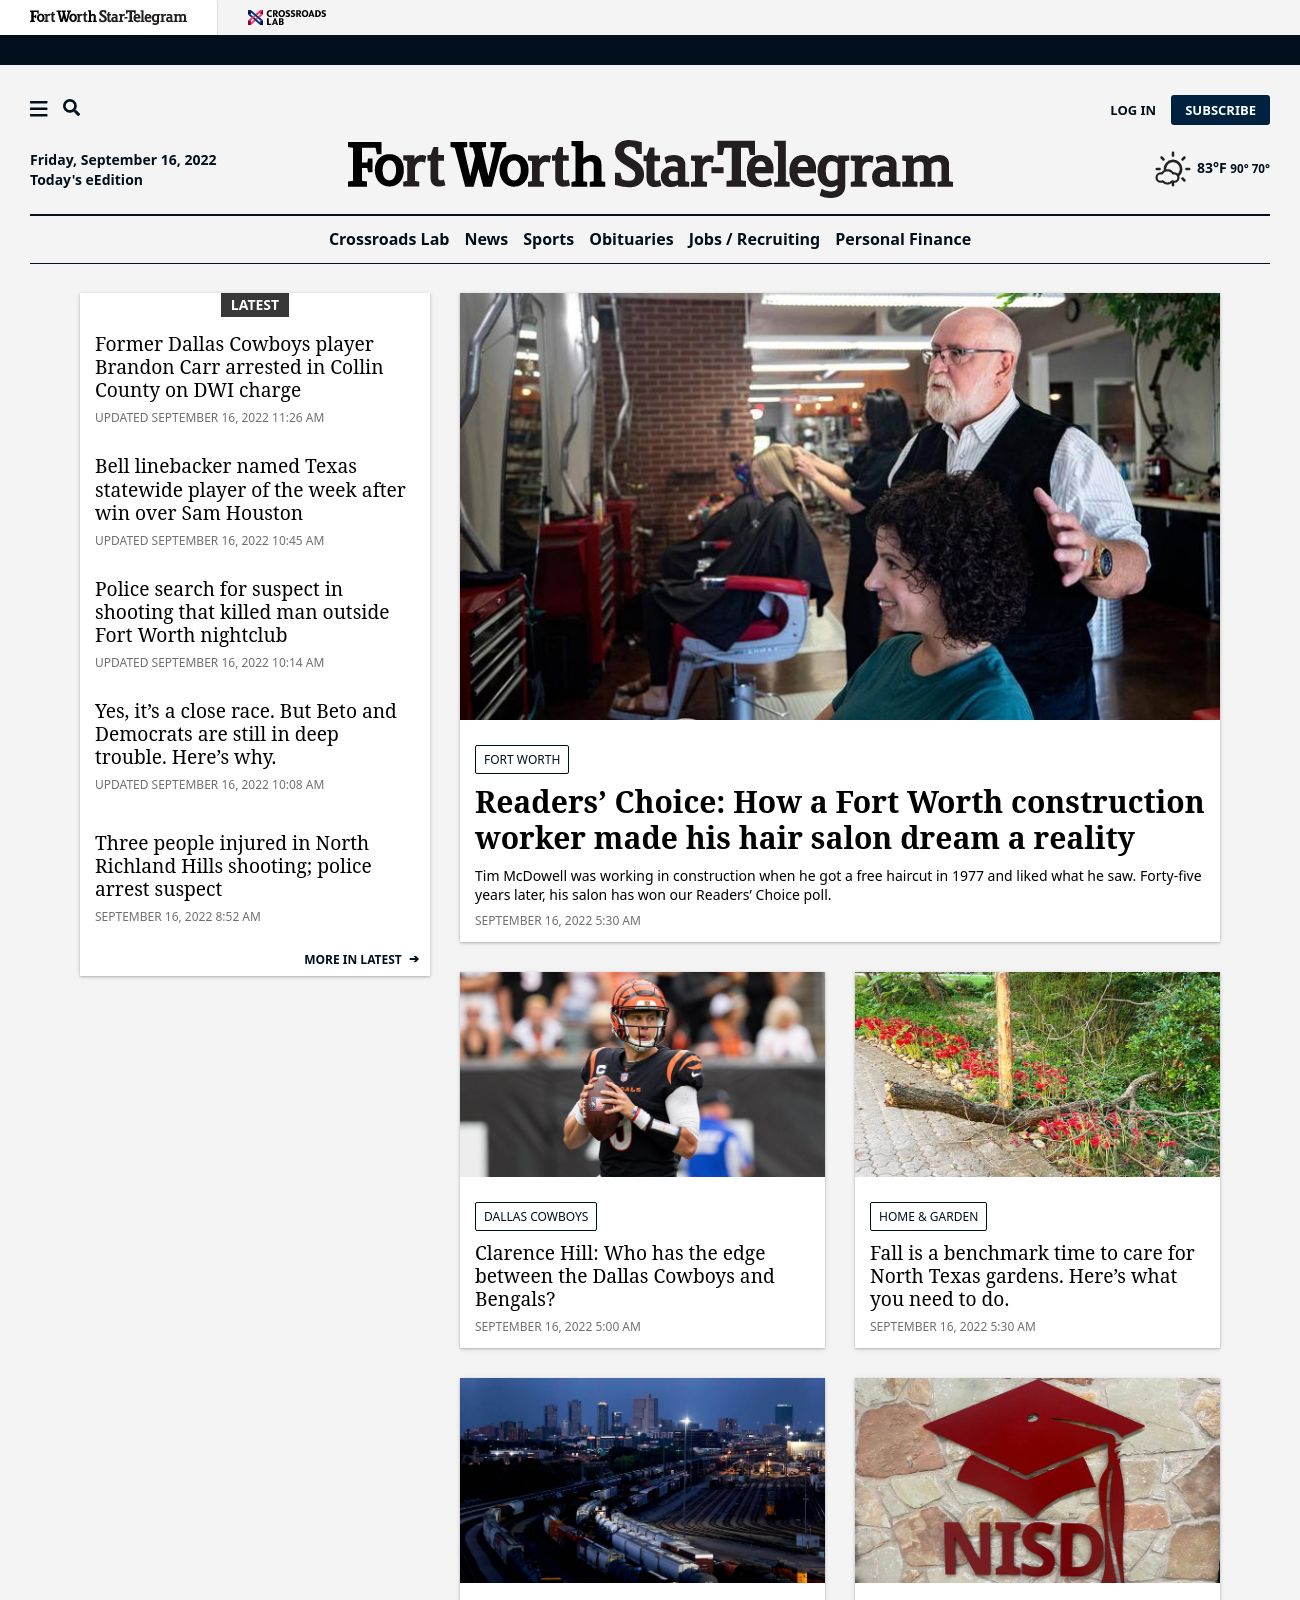 Fort Worth Star-Telegram at 2022-09-16 11:58:44-05:00 local time